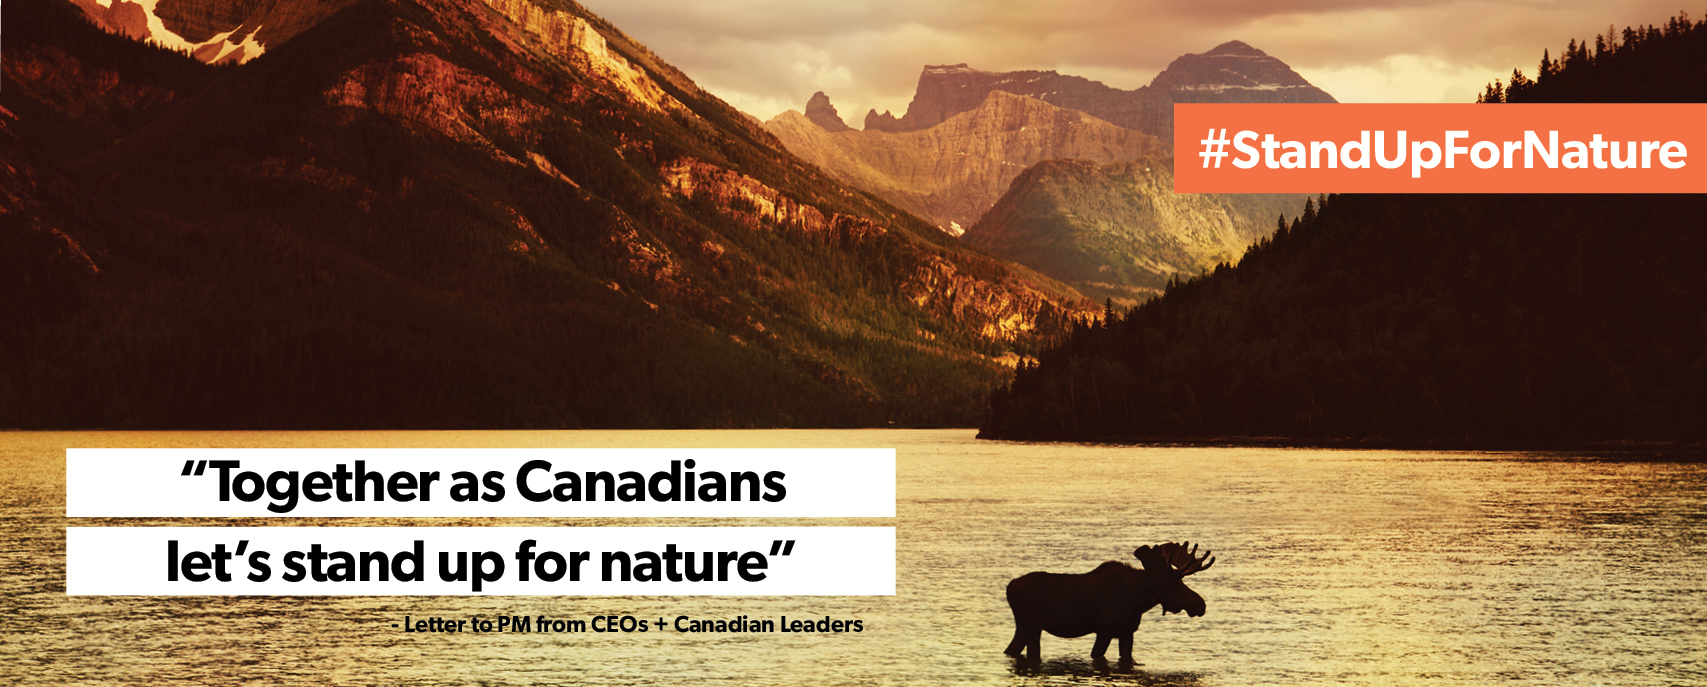 Together as Canadians, let's stand up for nature.